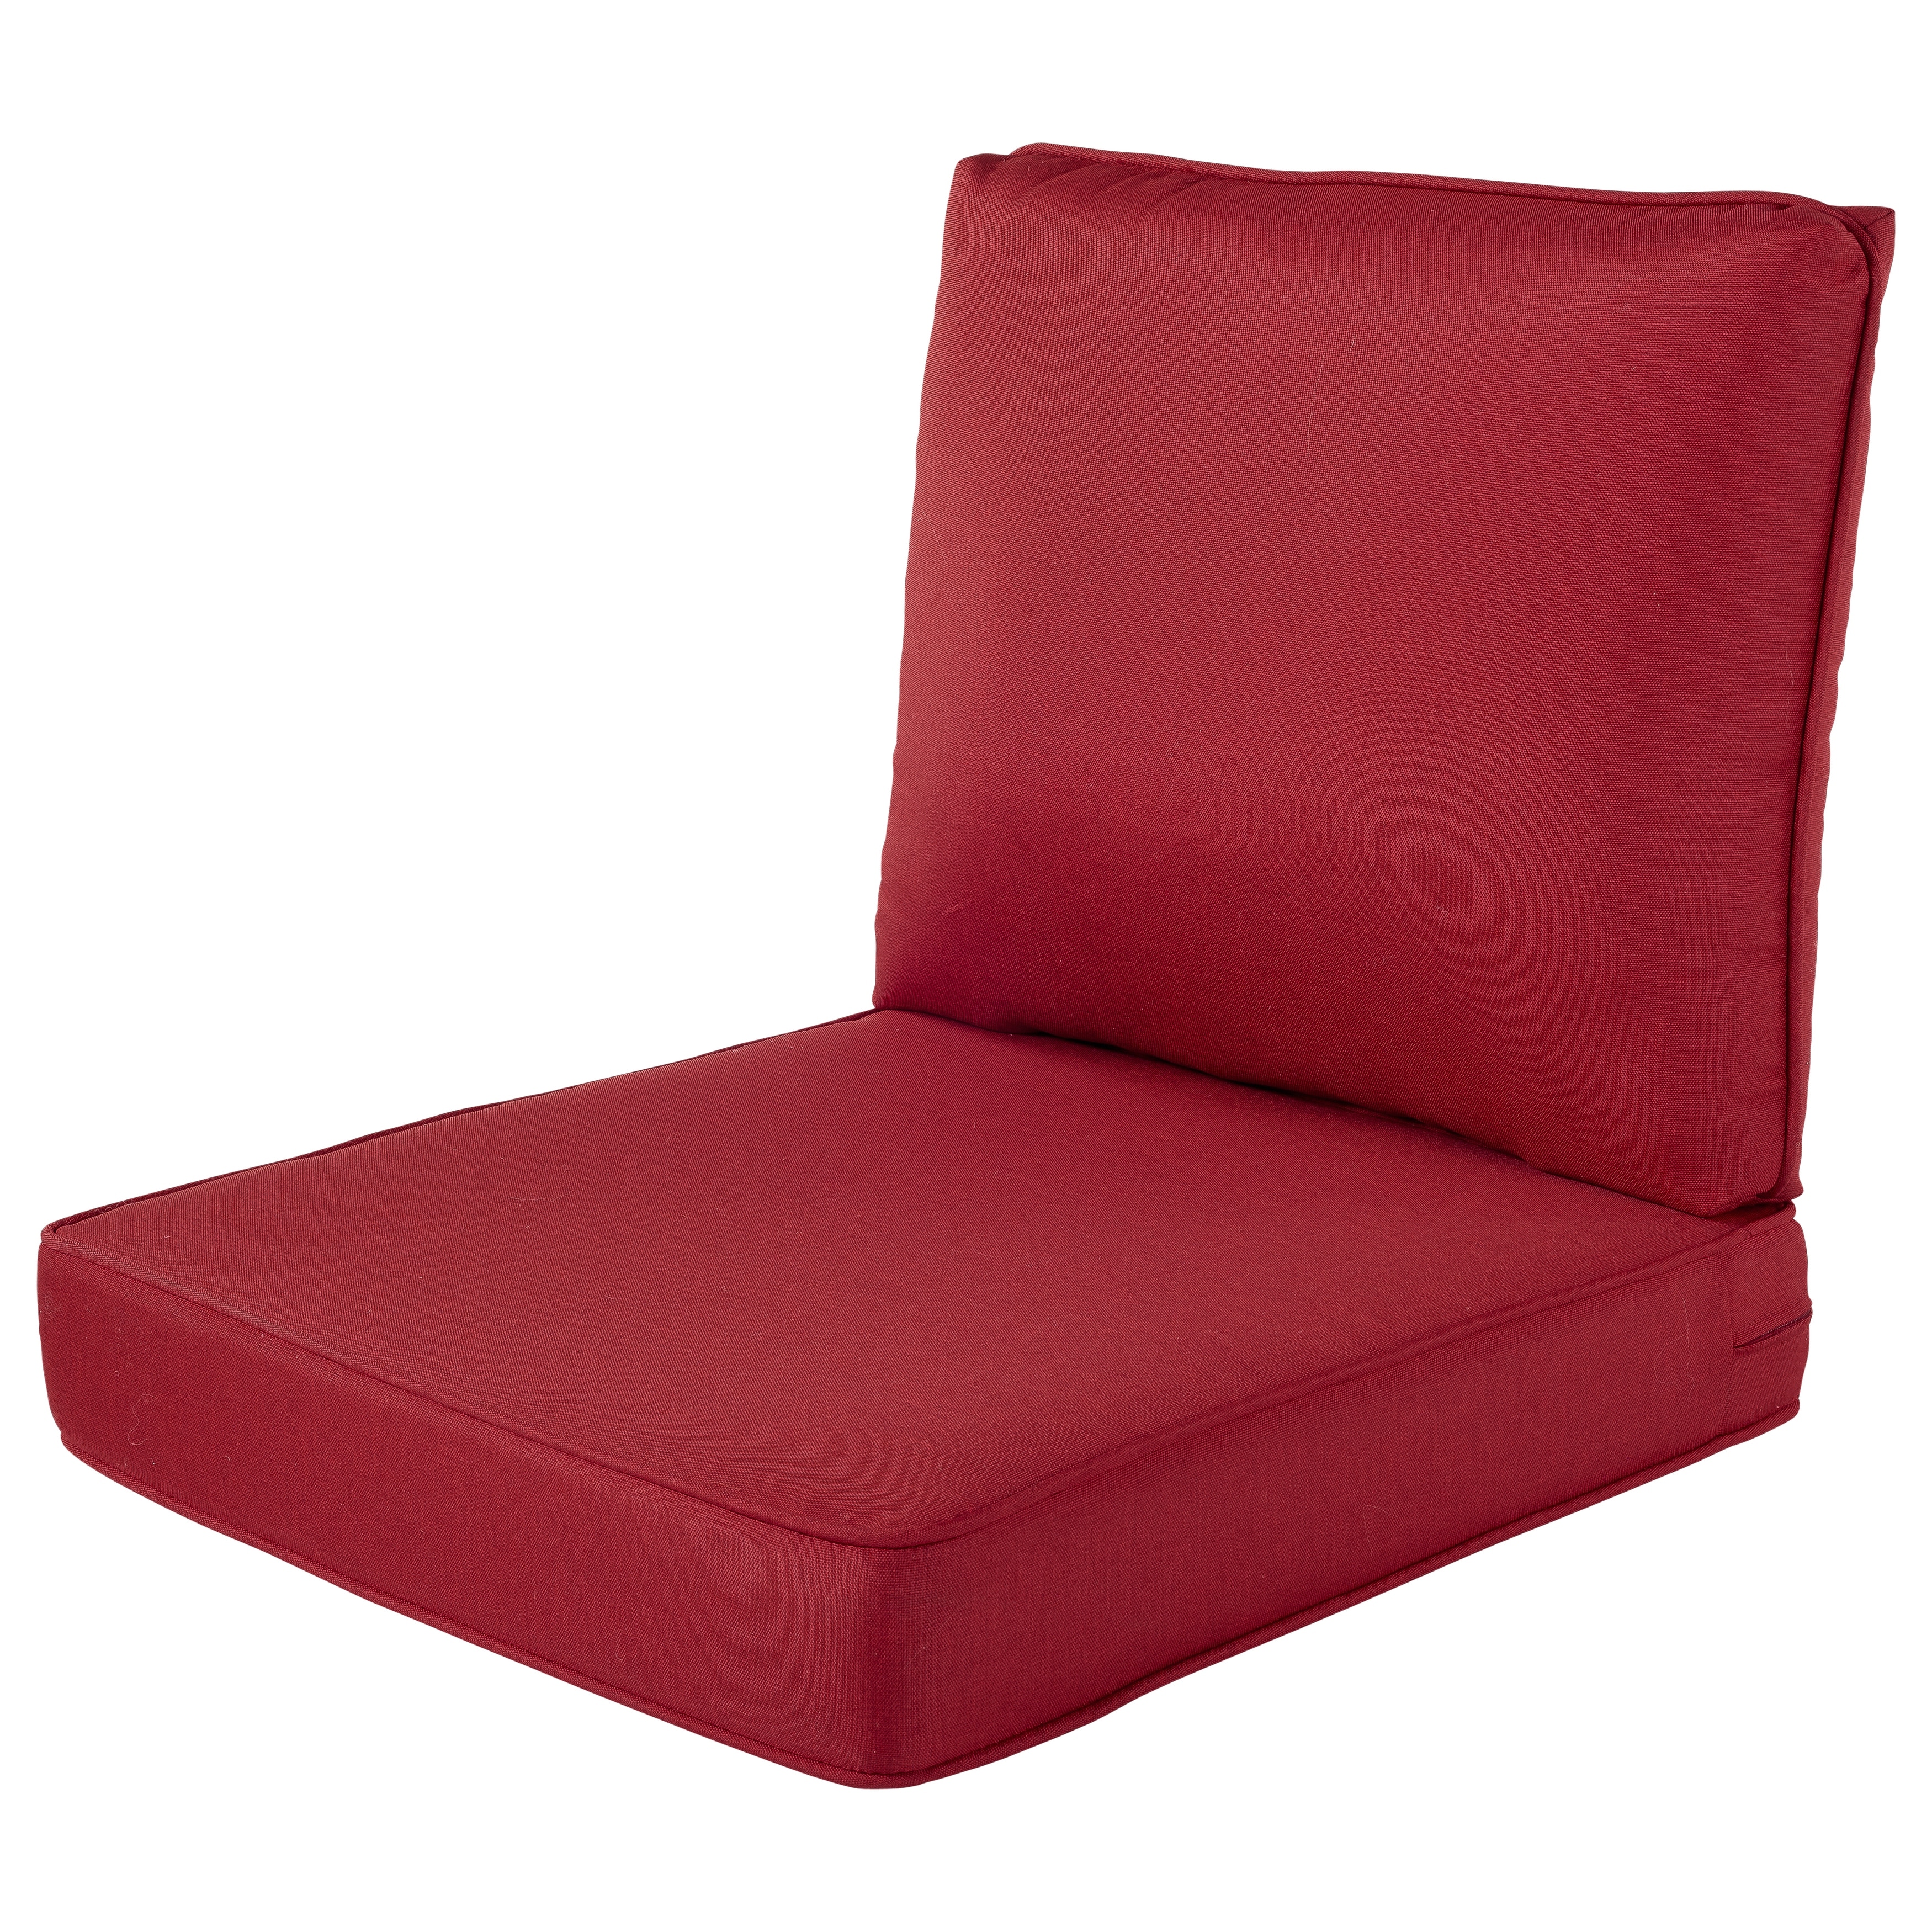 Haven Way Universal Outdoor Deep Seat Lounge Chair Cushion Set - 22x25 - Red